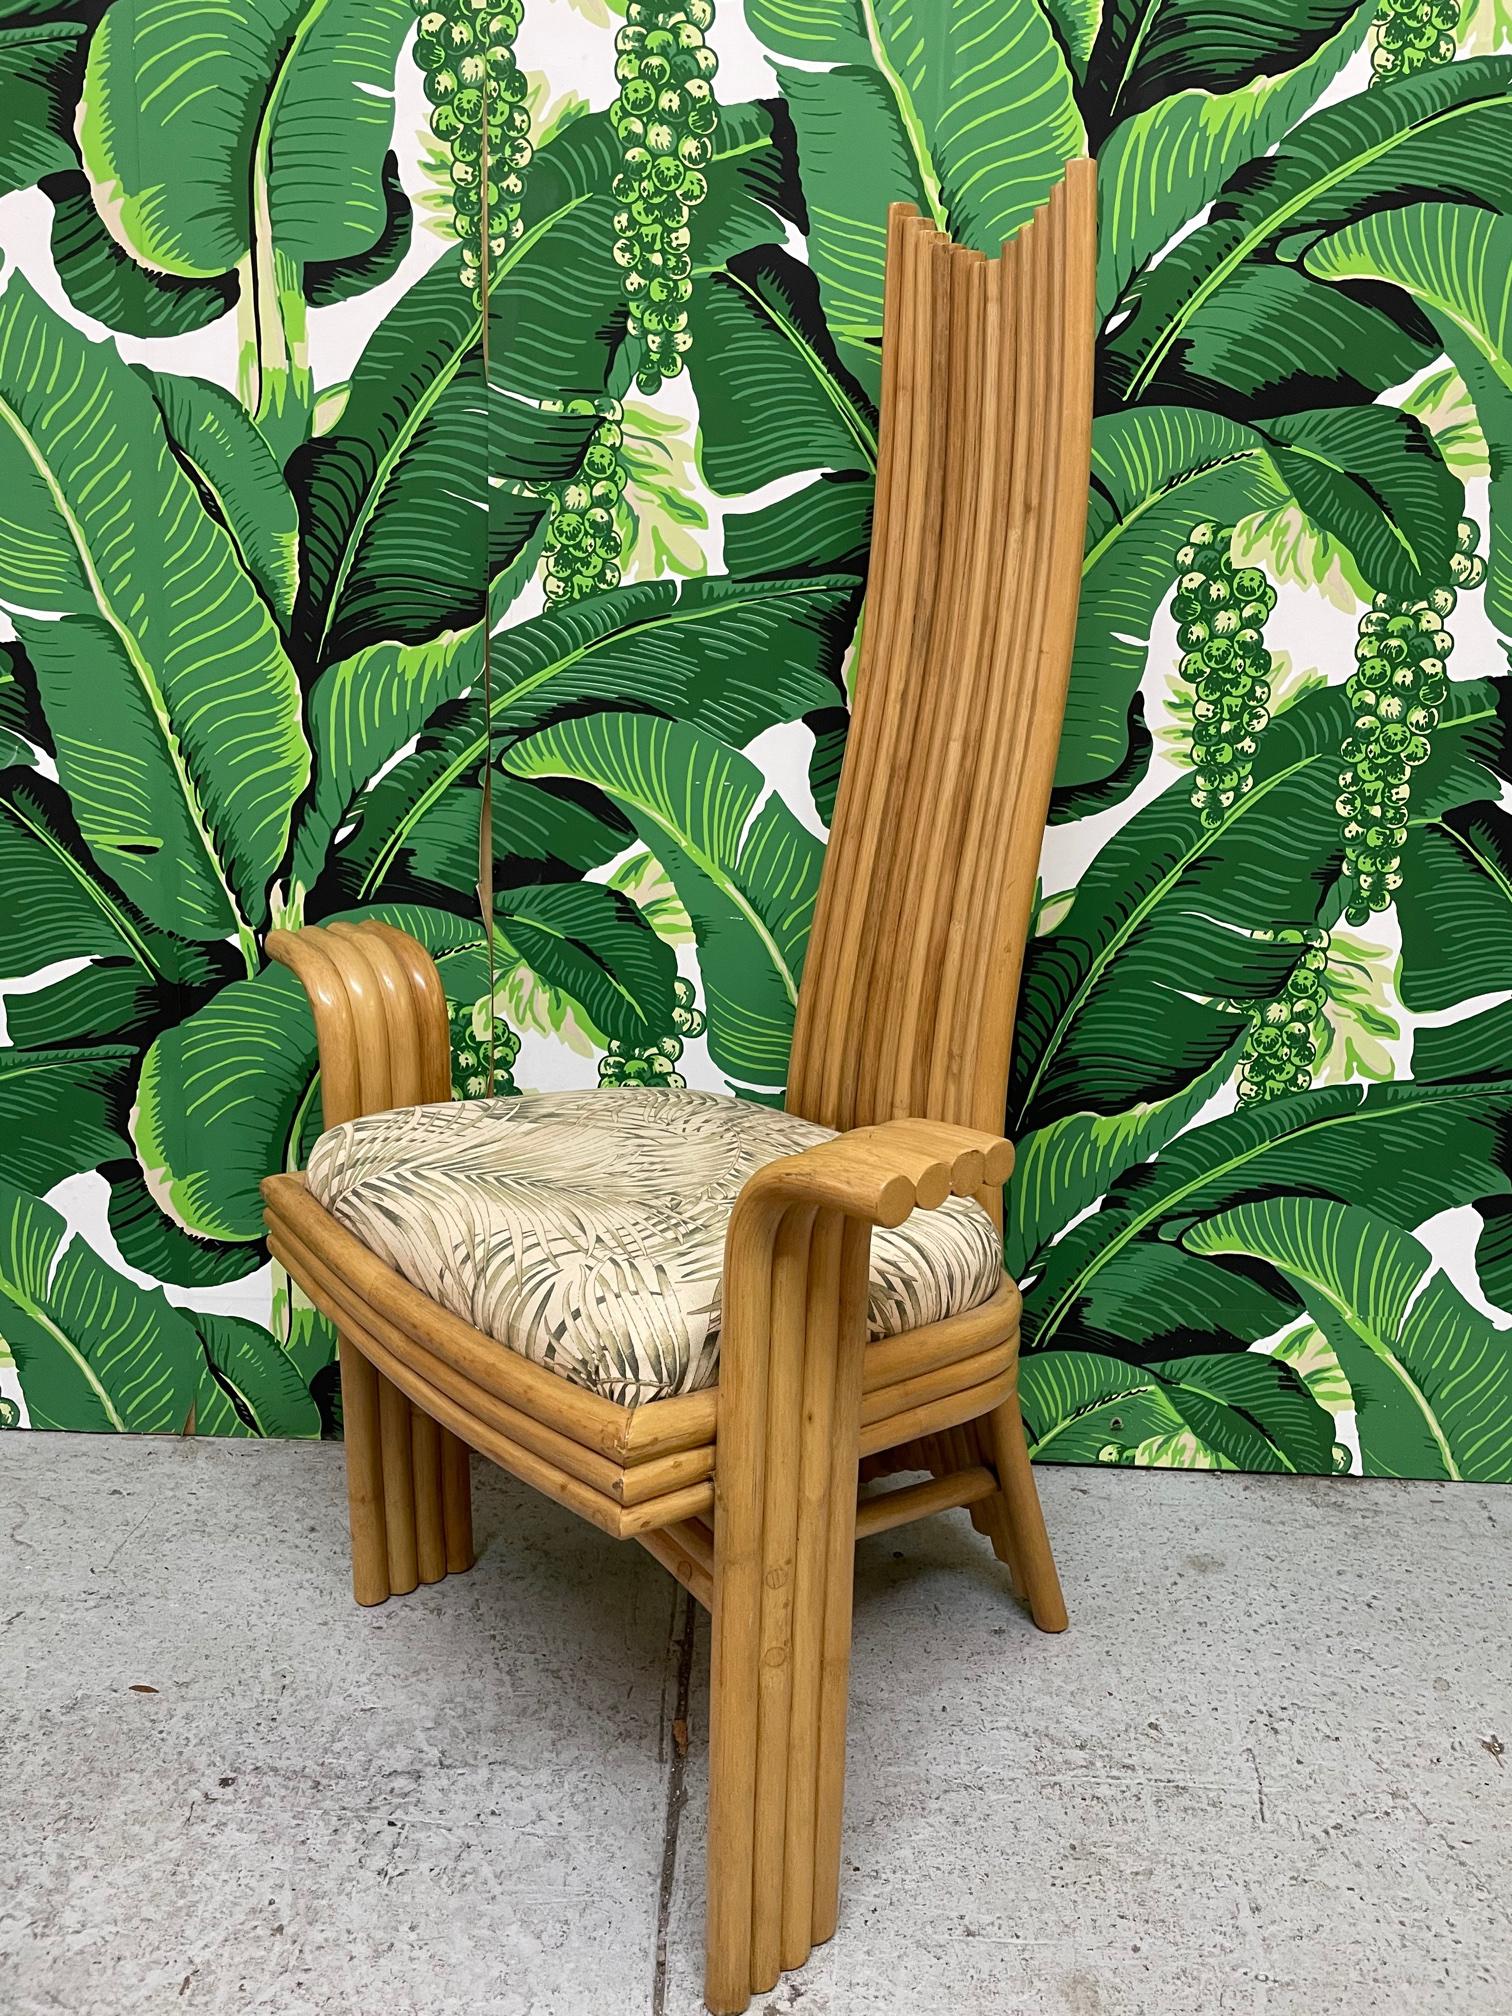 Rare set of six high back rattan dining chairs echoing the styles of Danny Ho Fong or Mackintosh. Unique modern sculptural design with two arm chairs and four side chairs. Makers mark on rear side of chair. Very good condition with minor